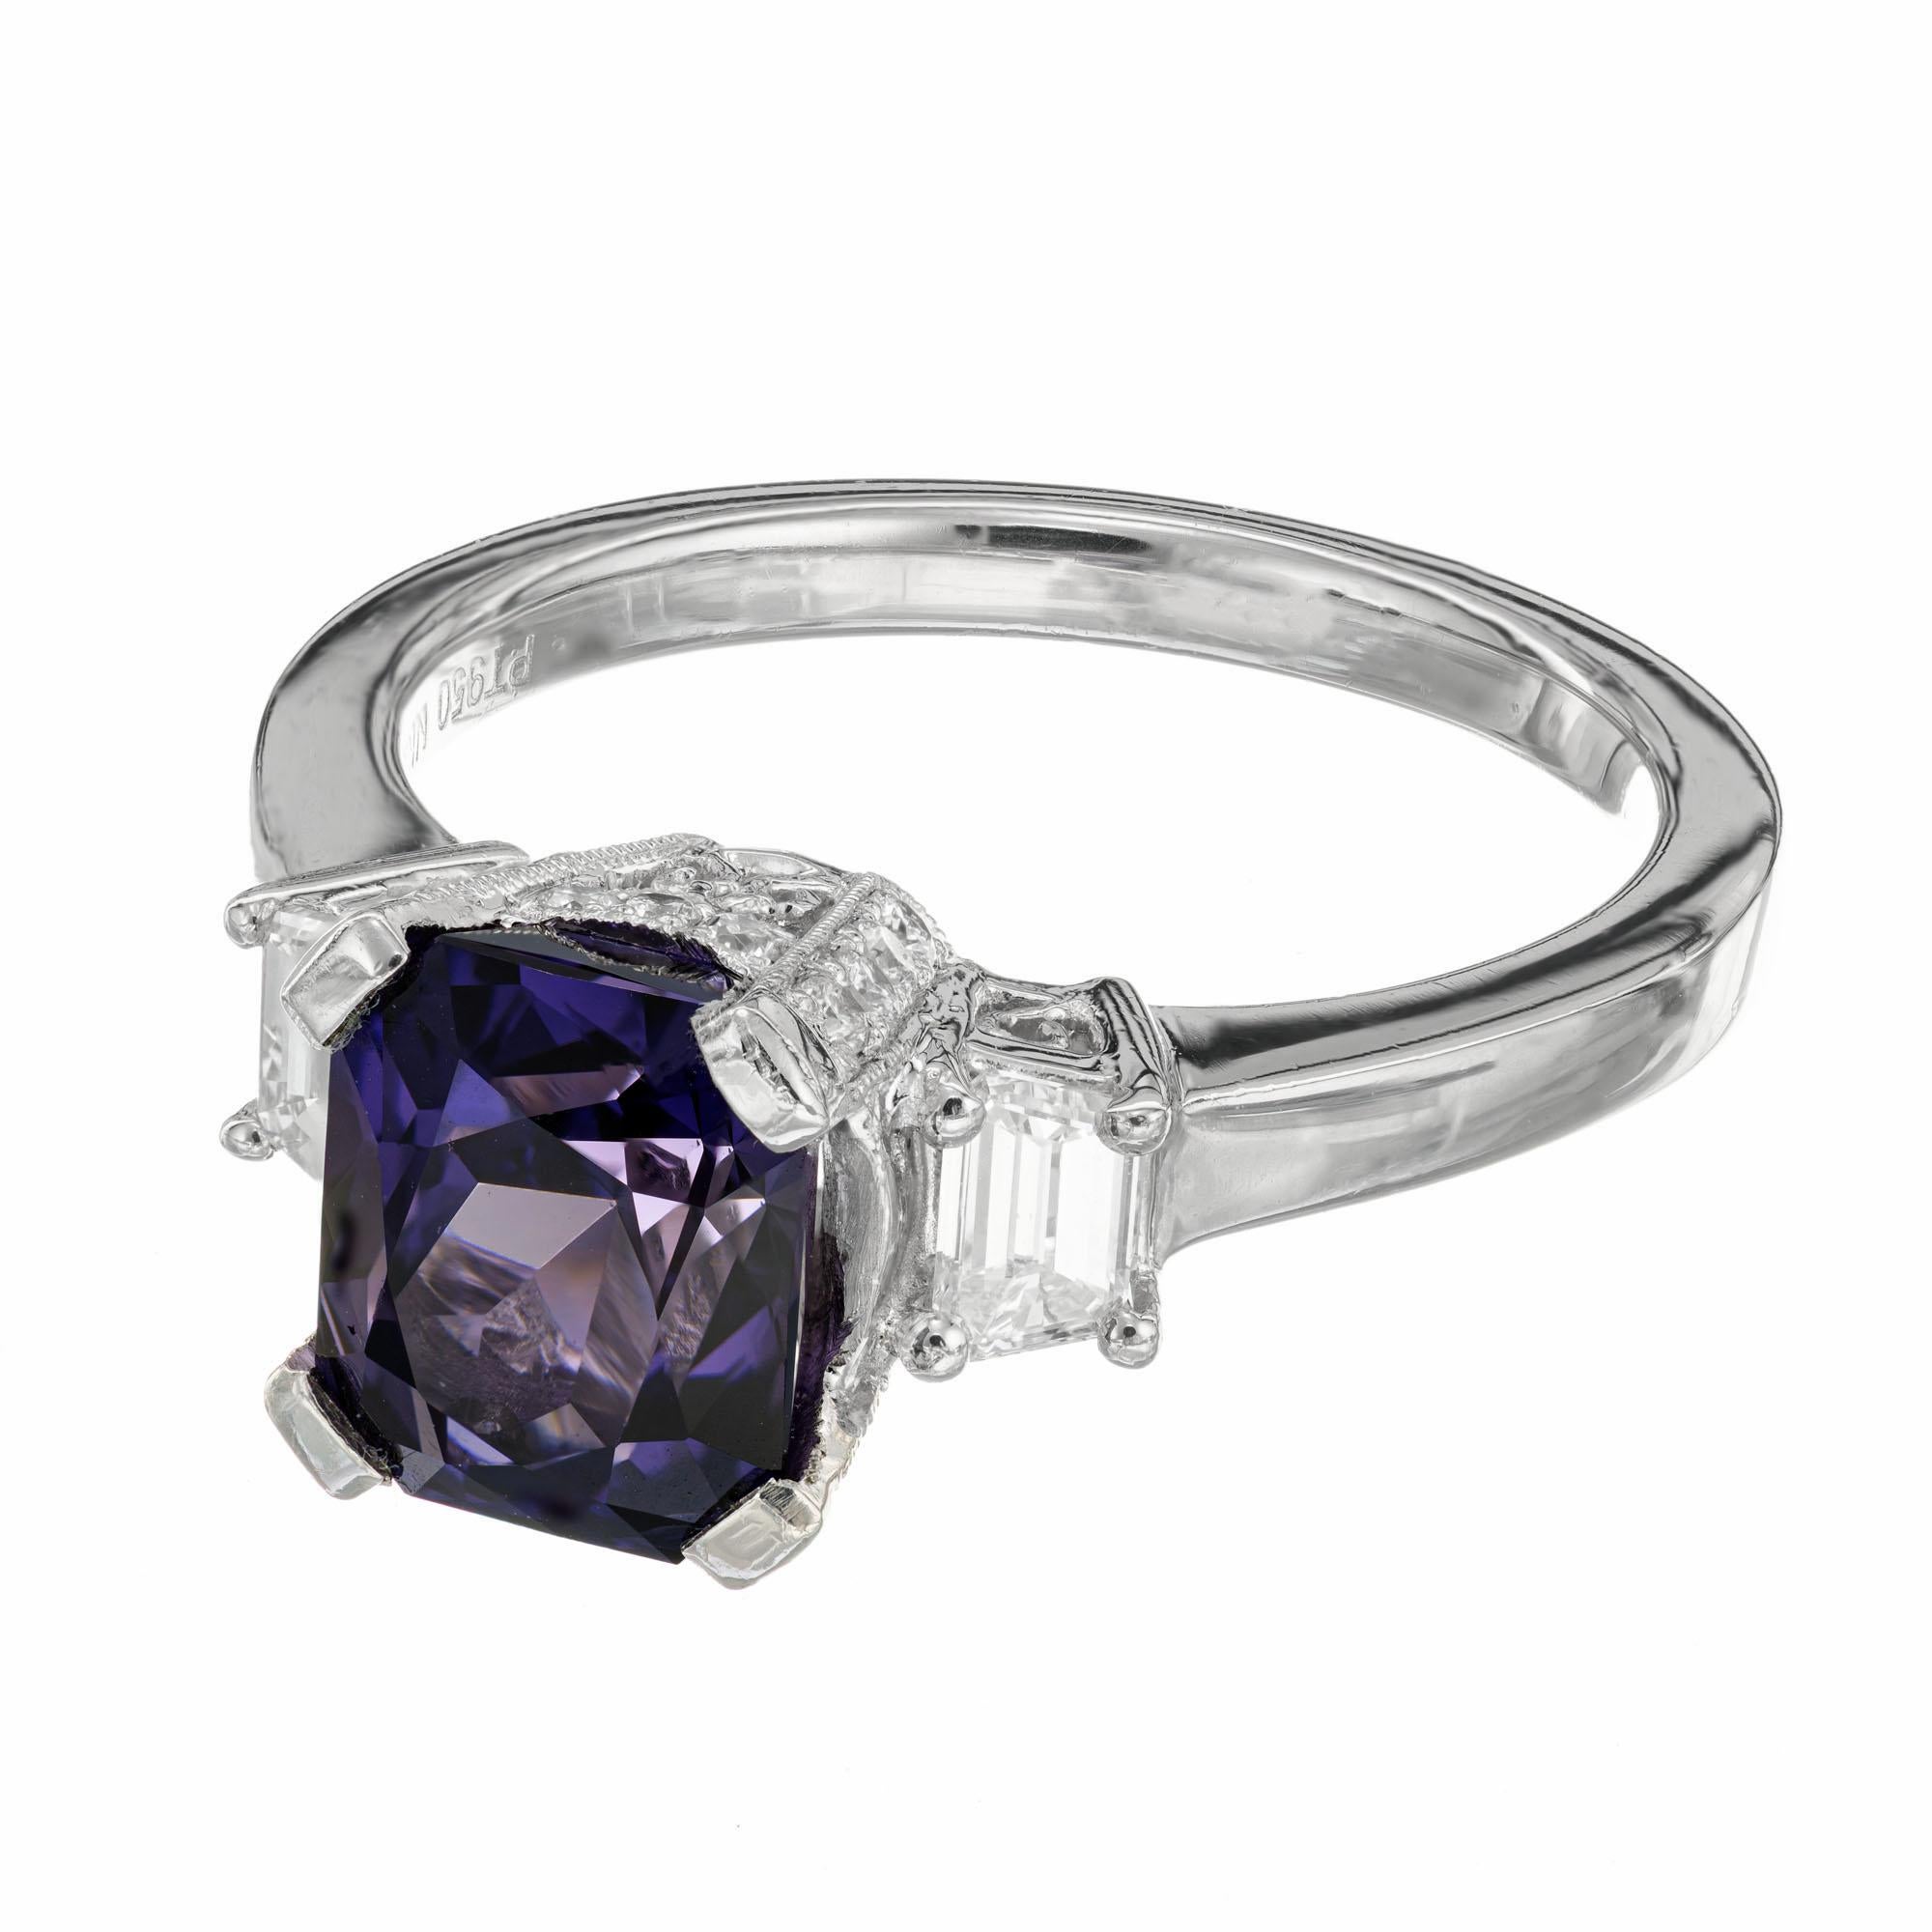 Natalie K GIA 3.33 Carat Octagonal Purple Sapphire Diamond Platinum Ring In Good Condition For Sale In Stamford, CT